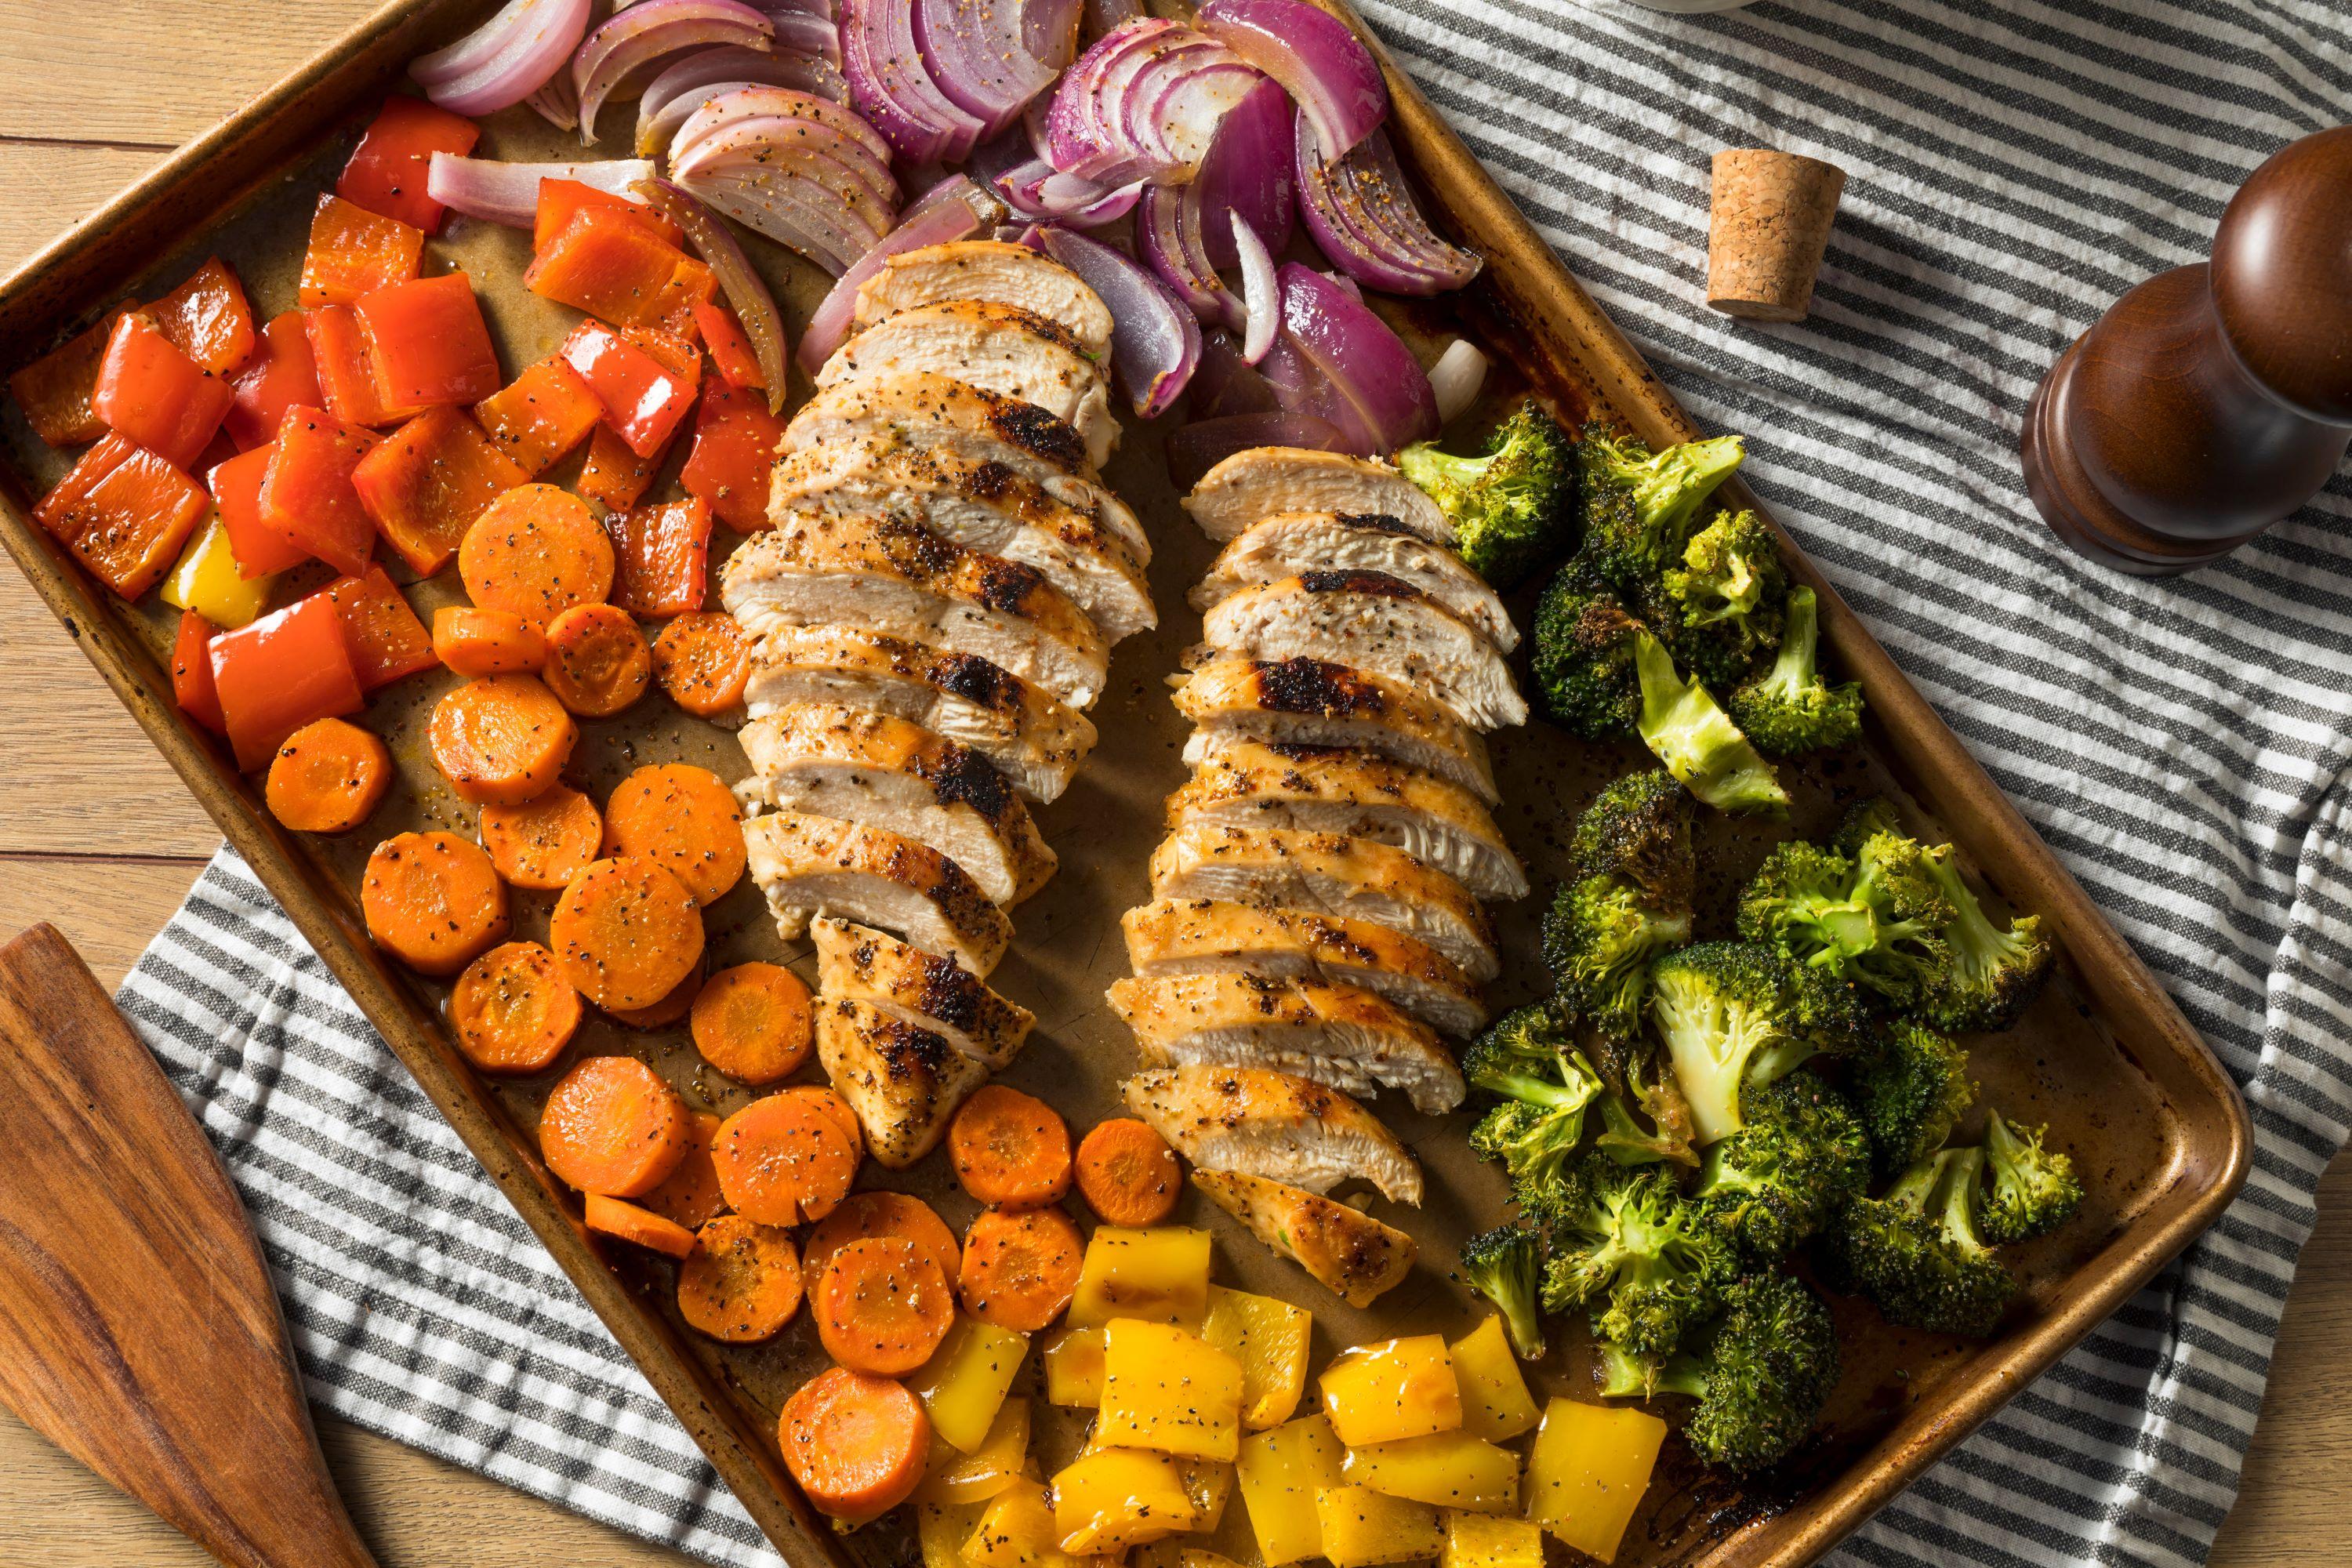 A sheet pan meal with carrots, bell peppers, broccoli, onions and chicken.